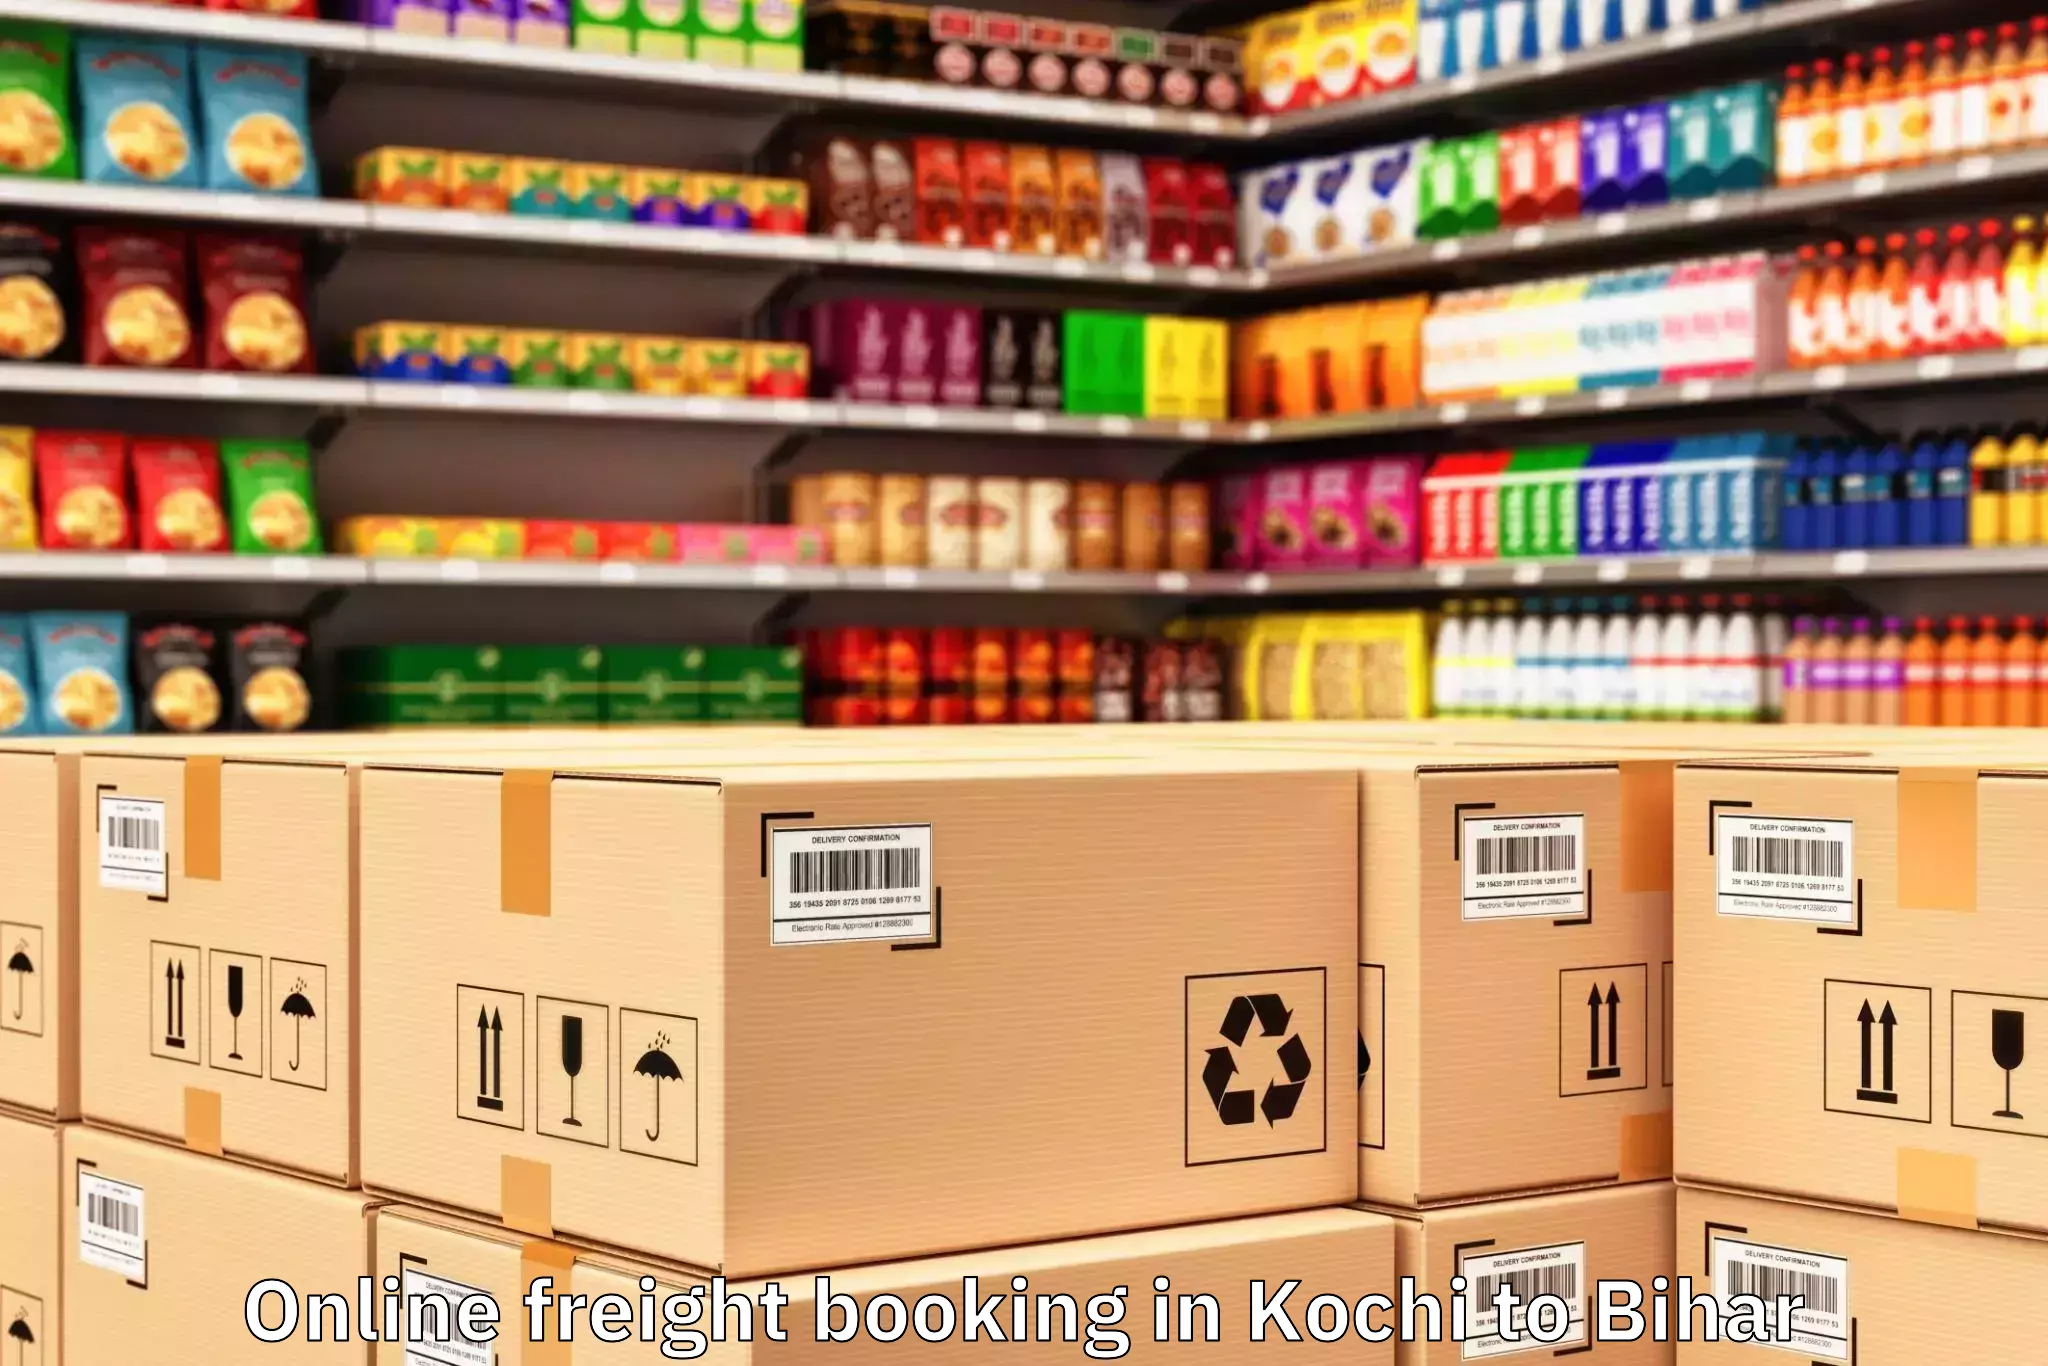 Discover Kochi to Gravity Mall Online Freight Booking